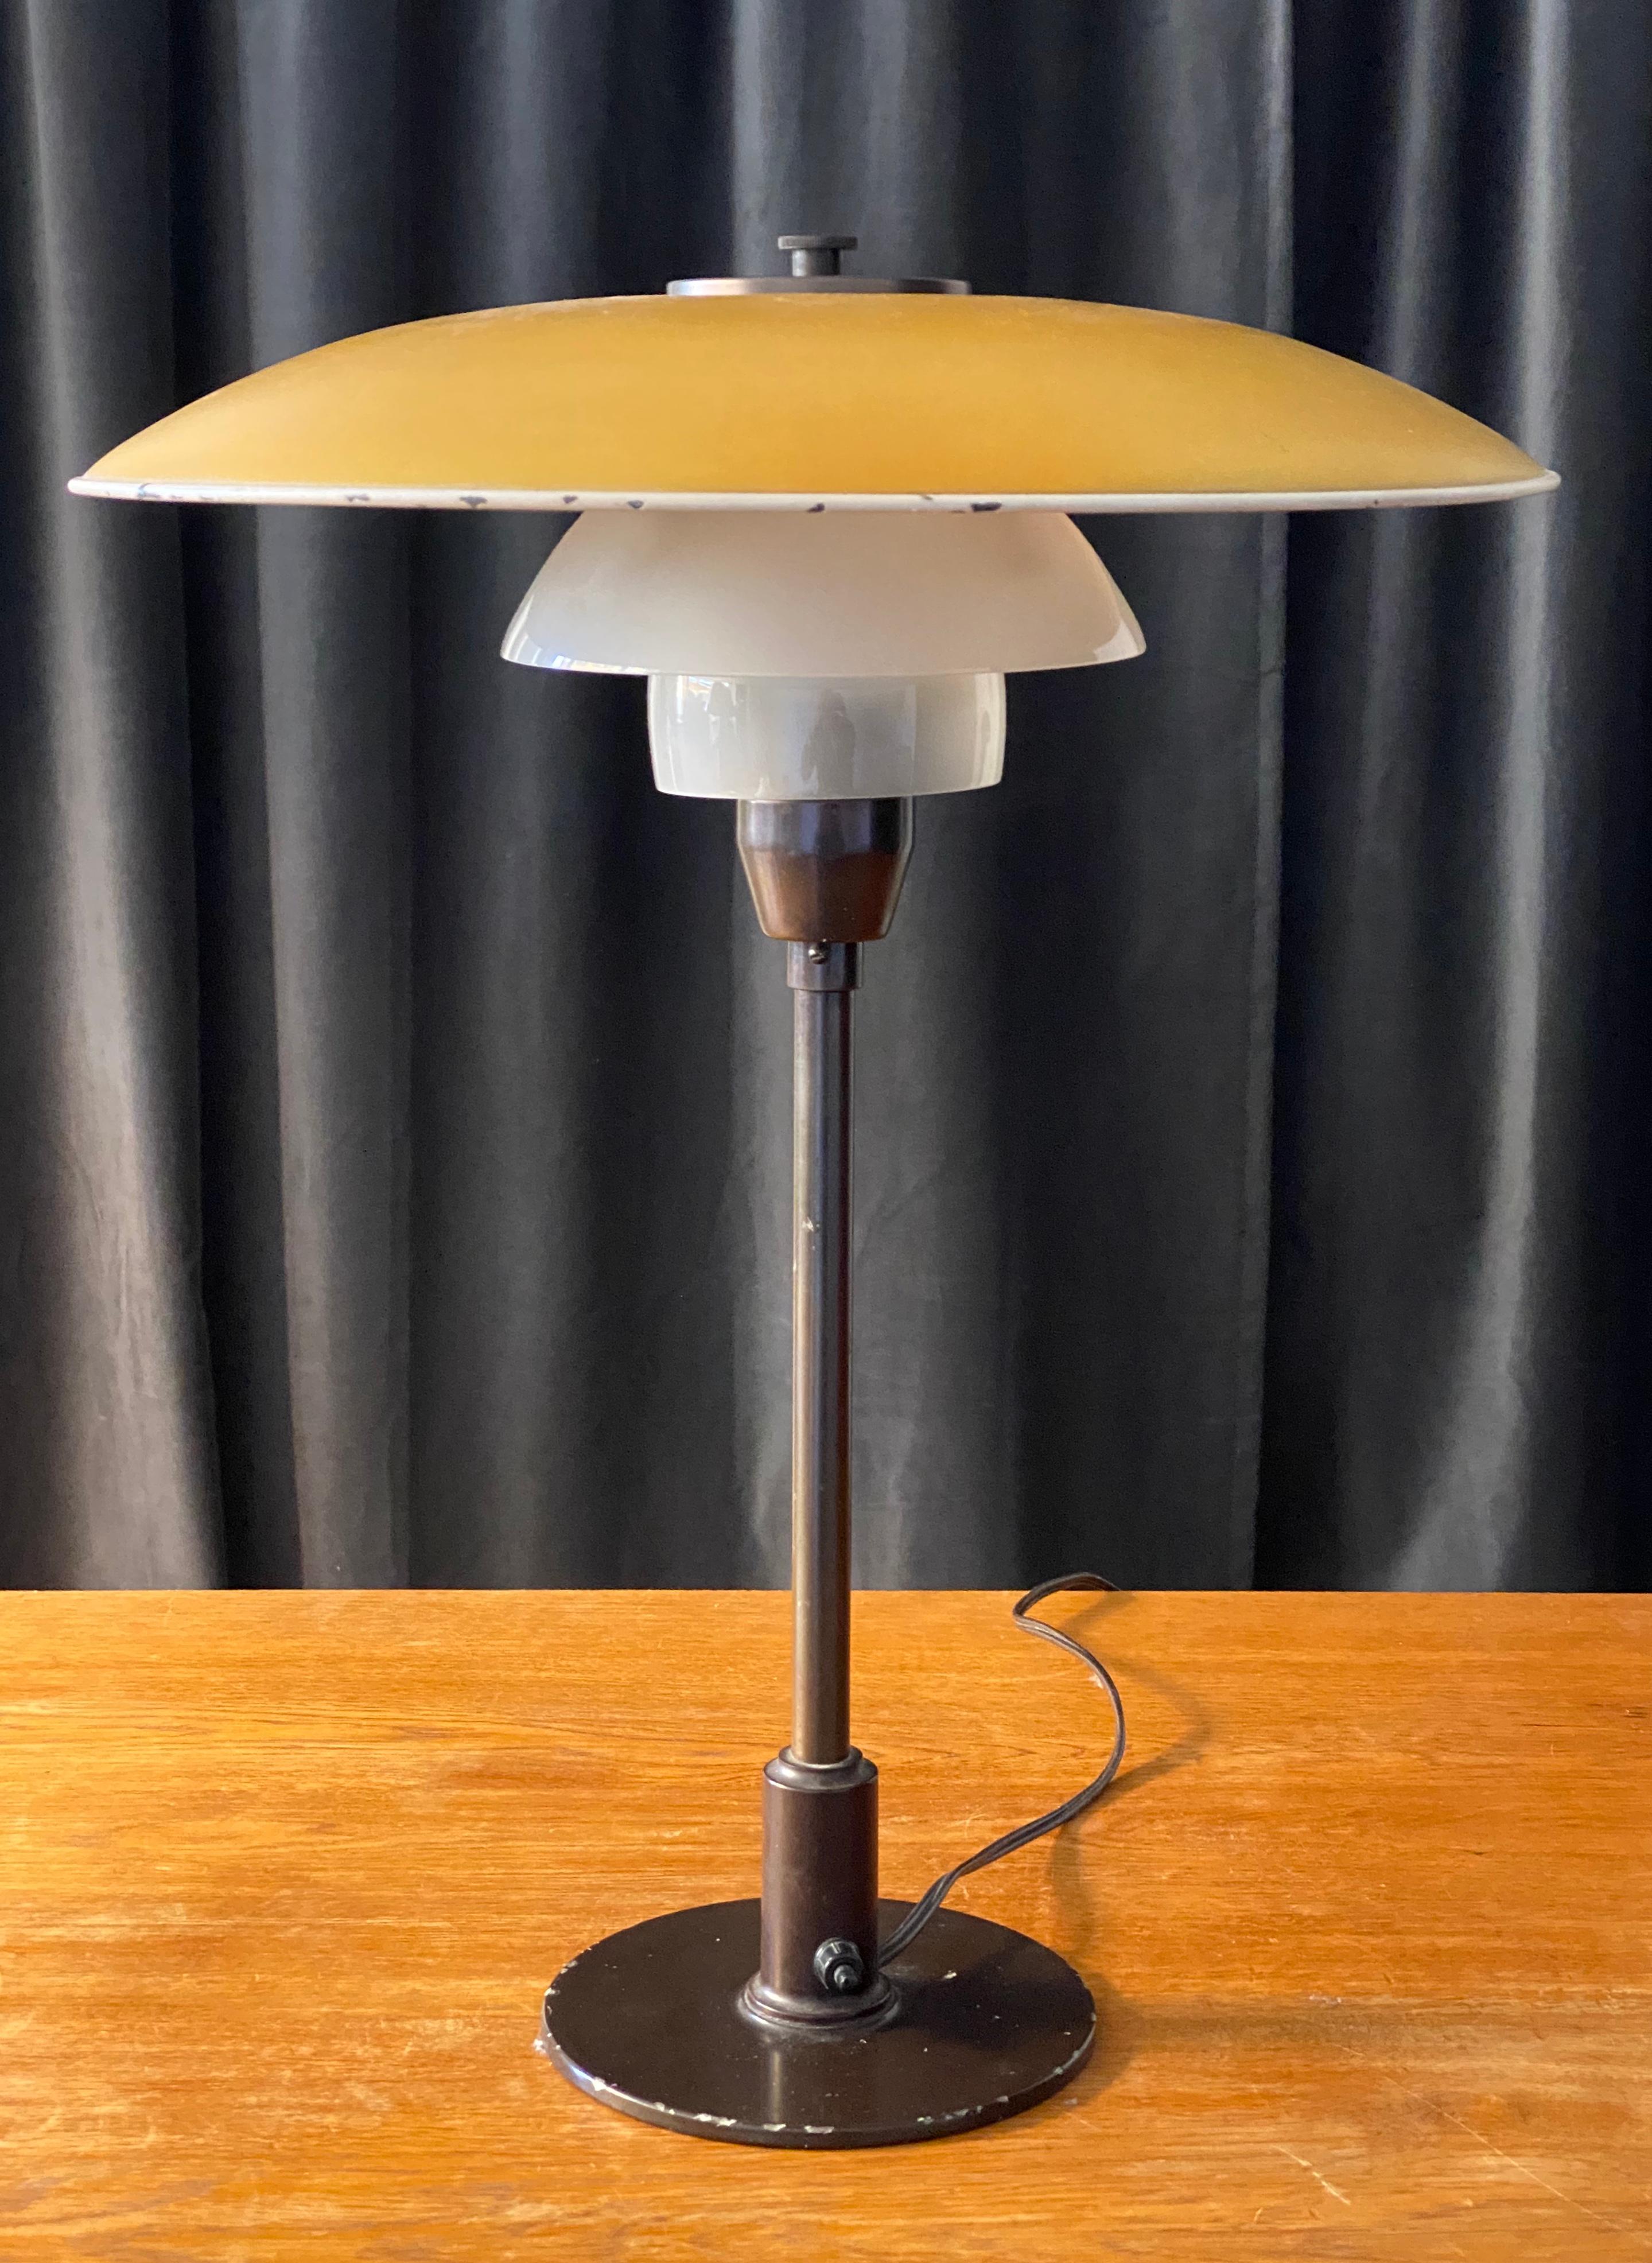 A table lamp designed by Poul Henningsen. Produced by Louis Poulsen. With its original glass and metal shades. Browned brass and bakelite. 

Other designers of the period include Kaare Klint, Paavo Tynell, Lisa Johansson Pape, and Alvar Aalto.